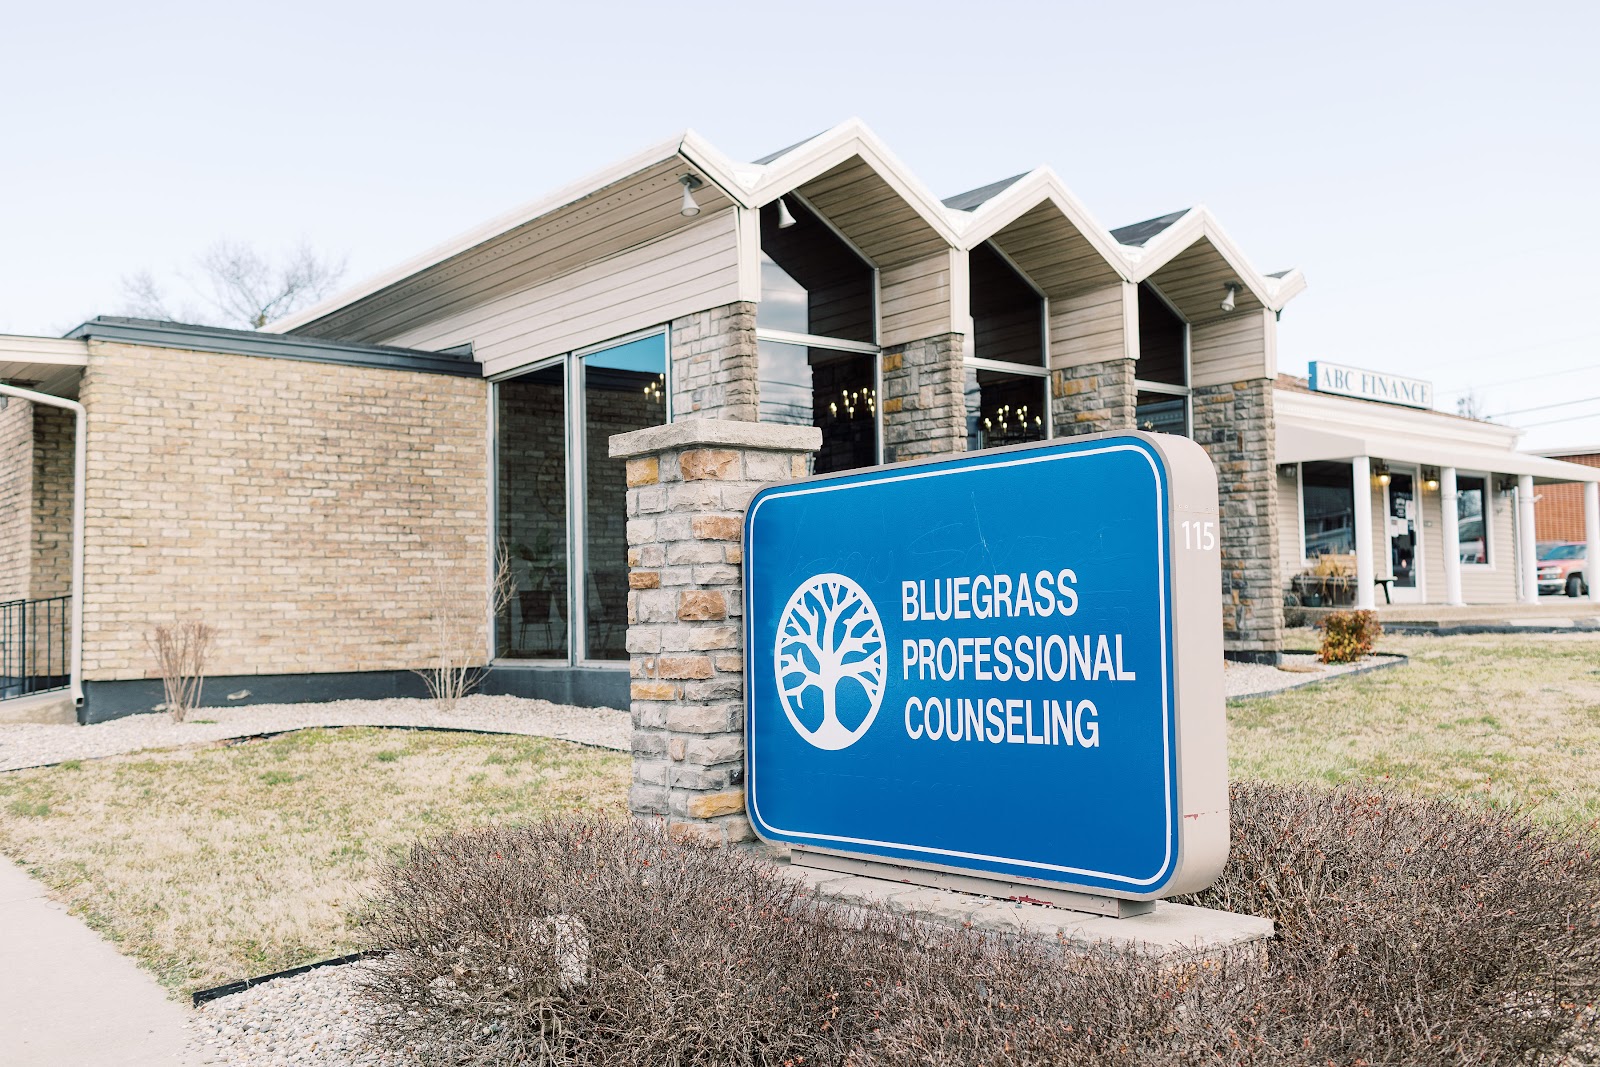 Bluegrass Professional Counseling